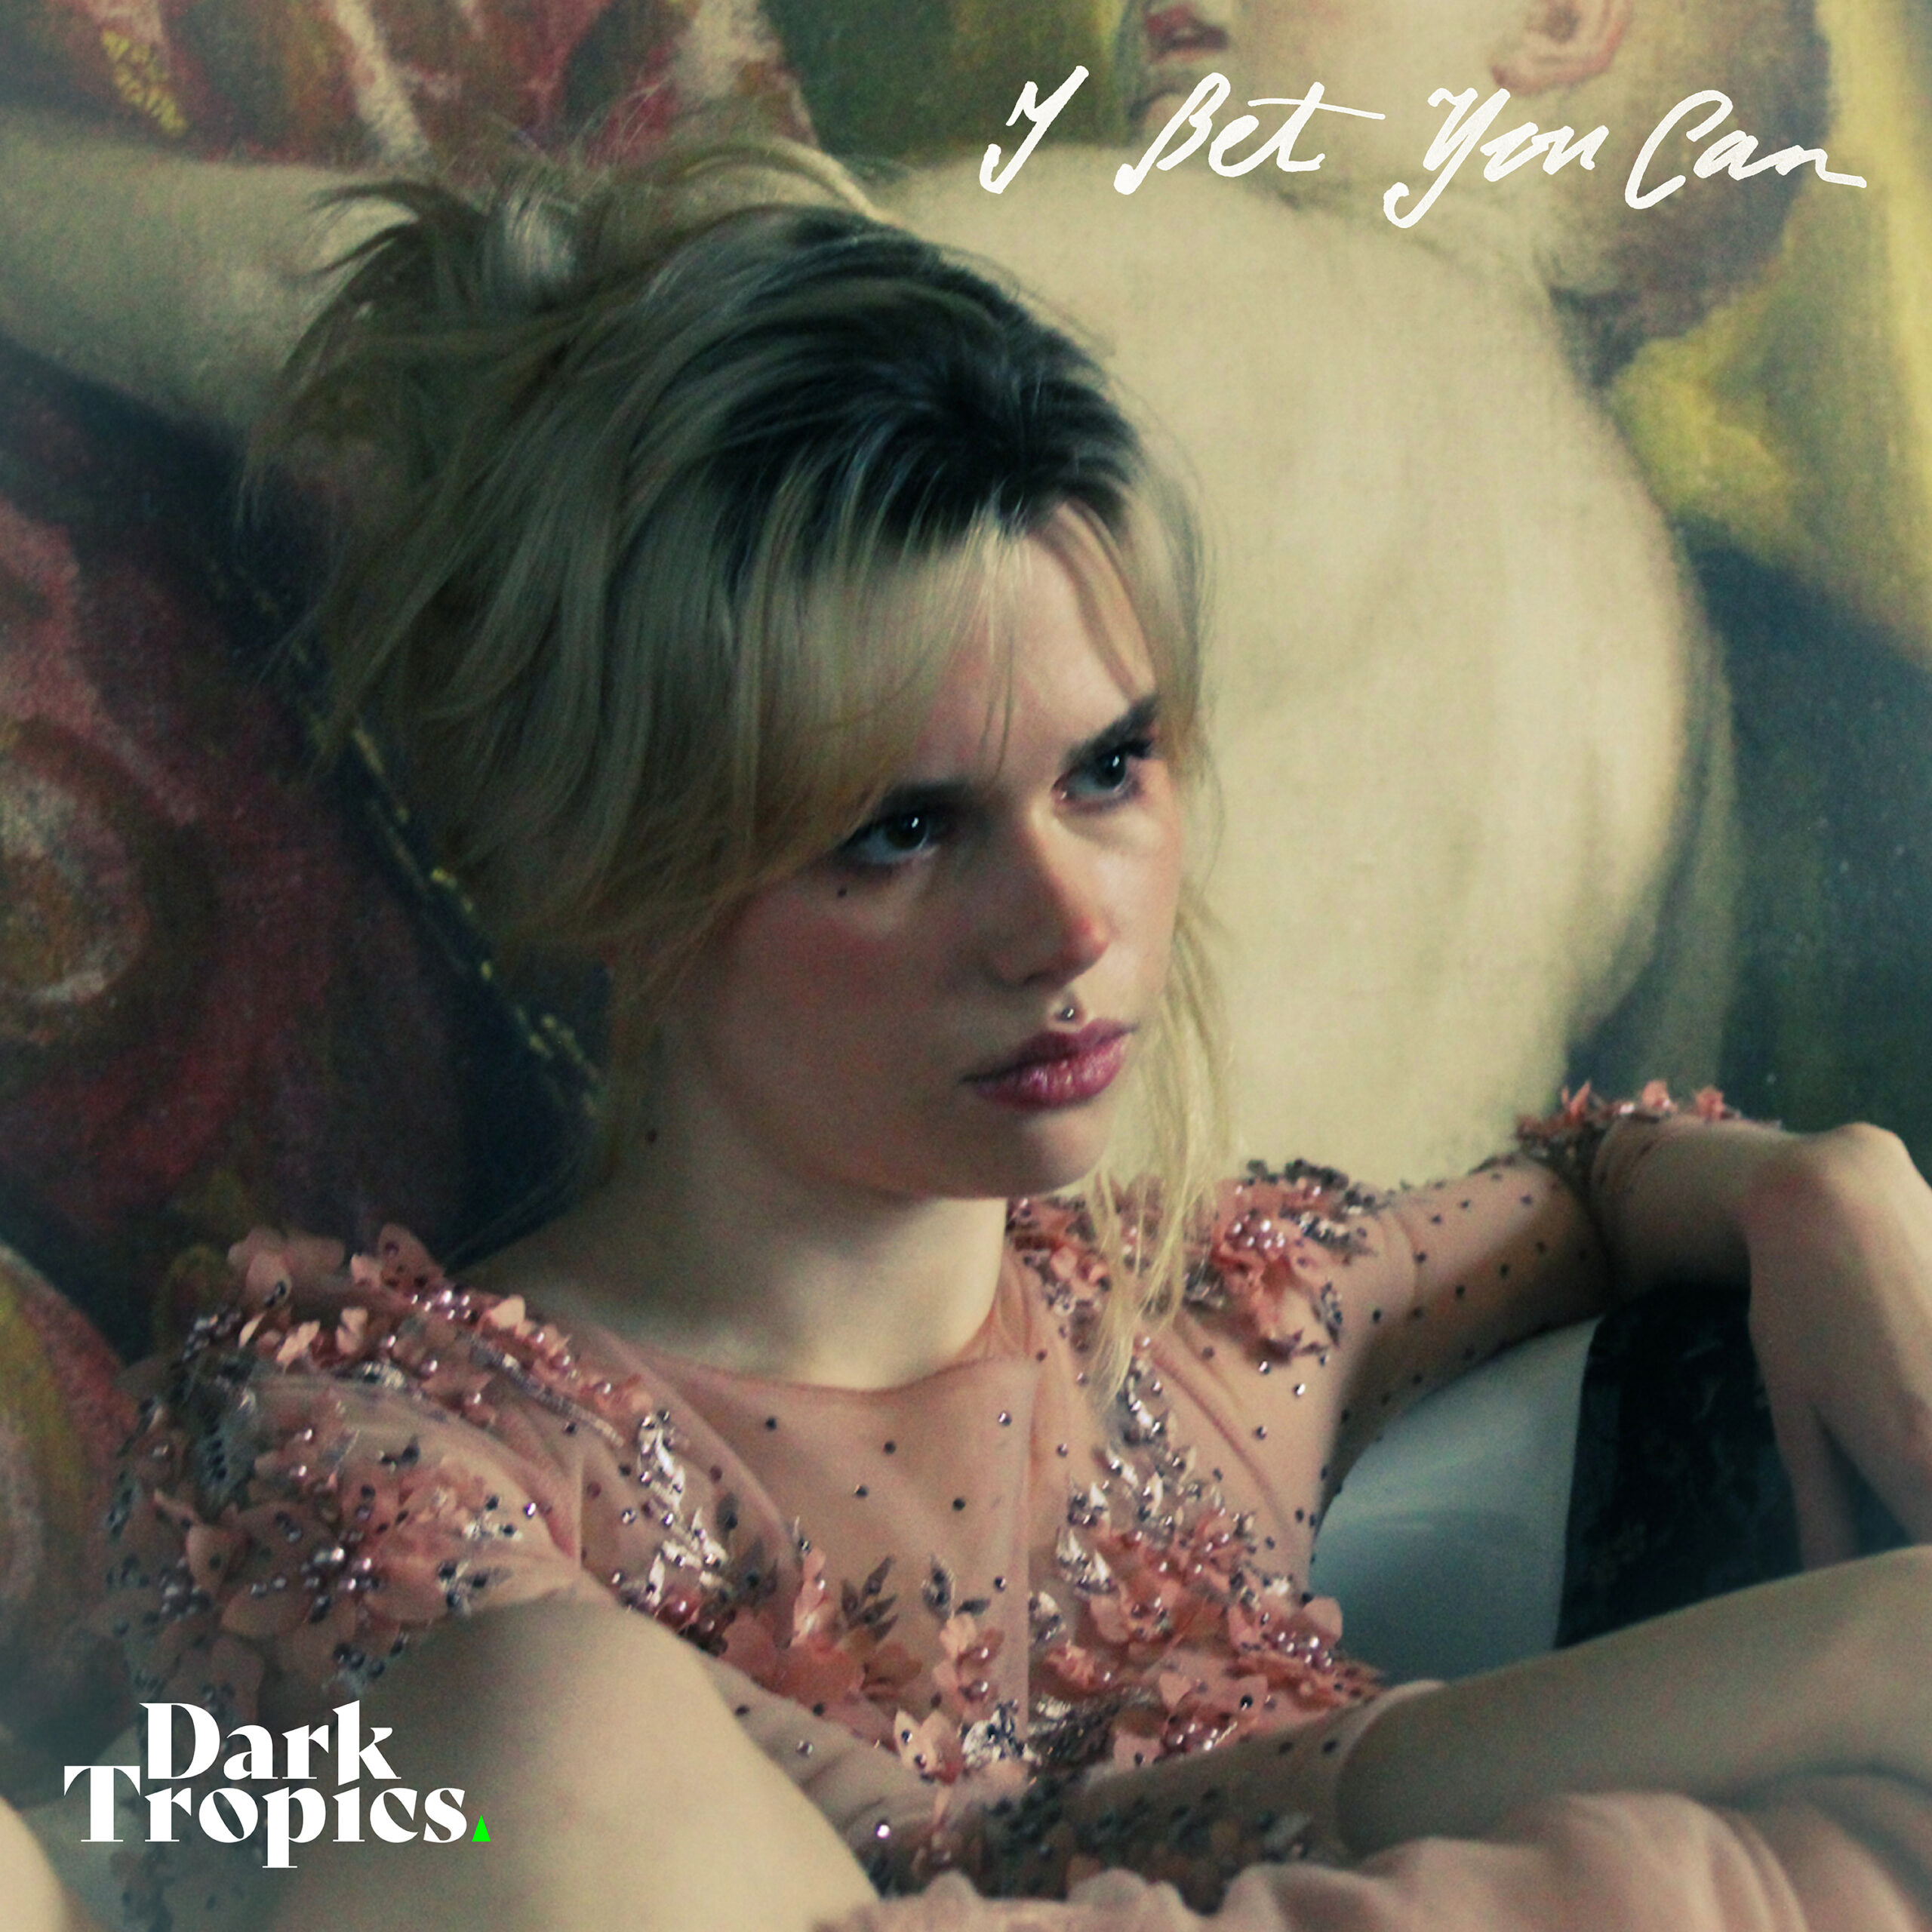 LISTEN: “I Bet You Can” by Dark Tropics